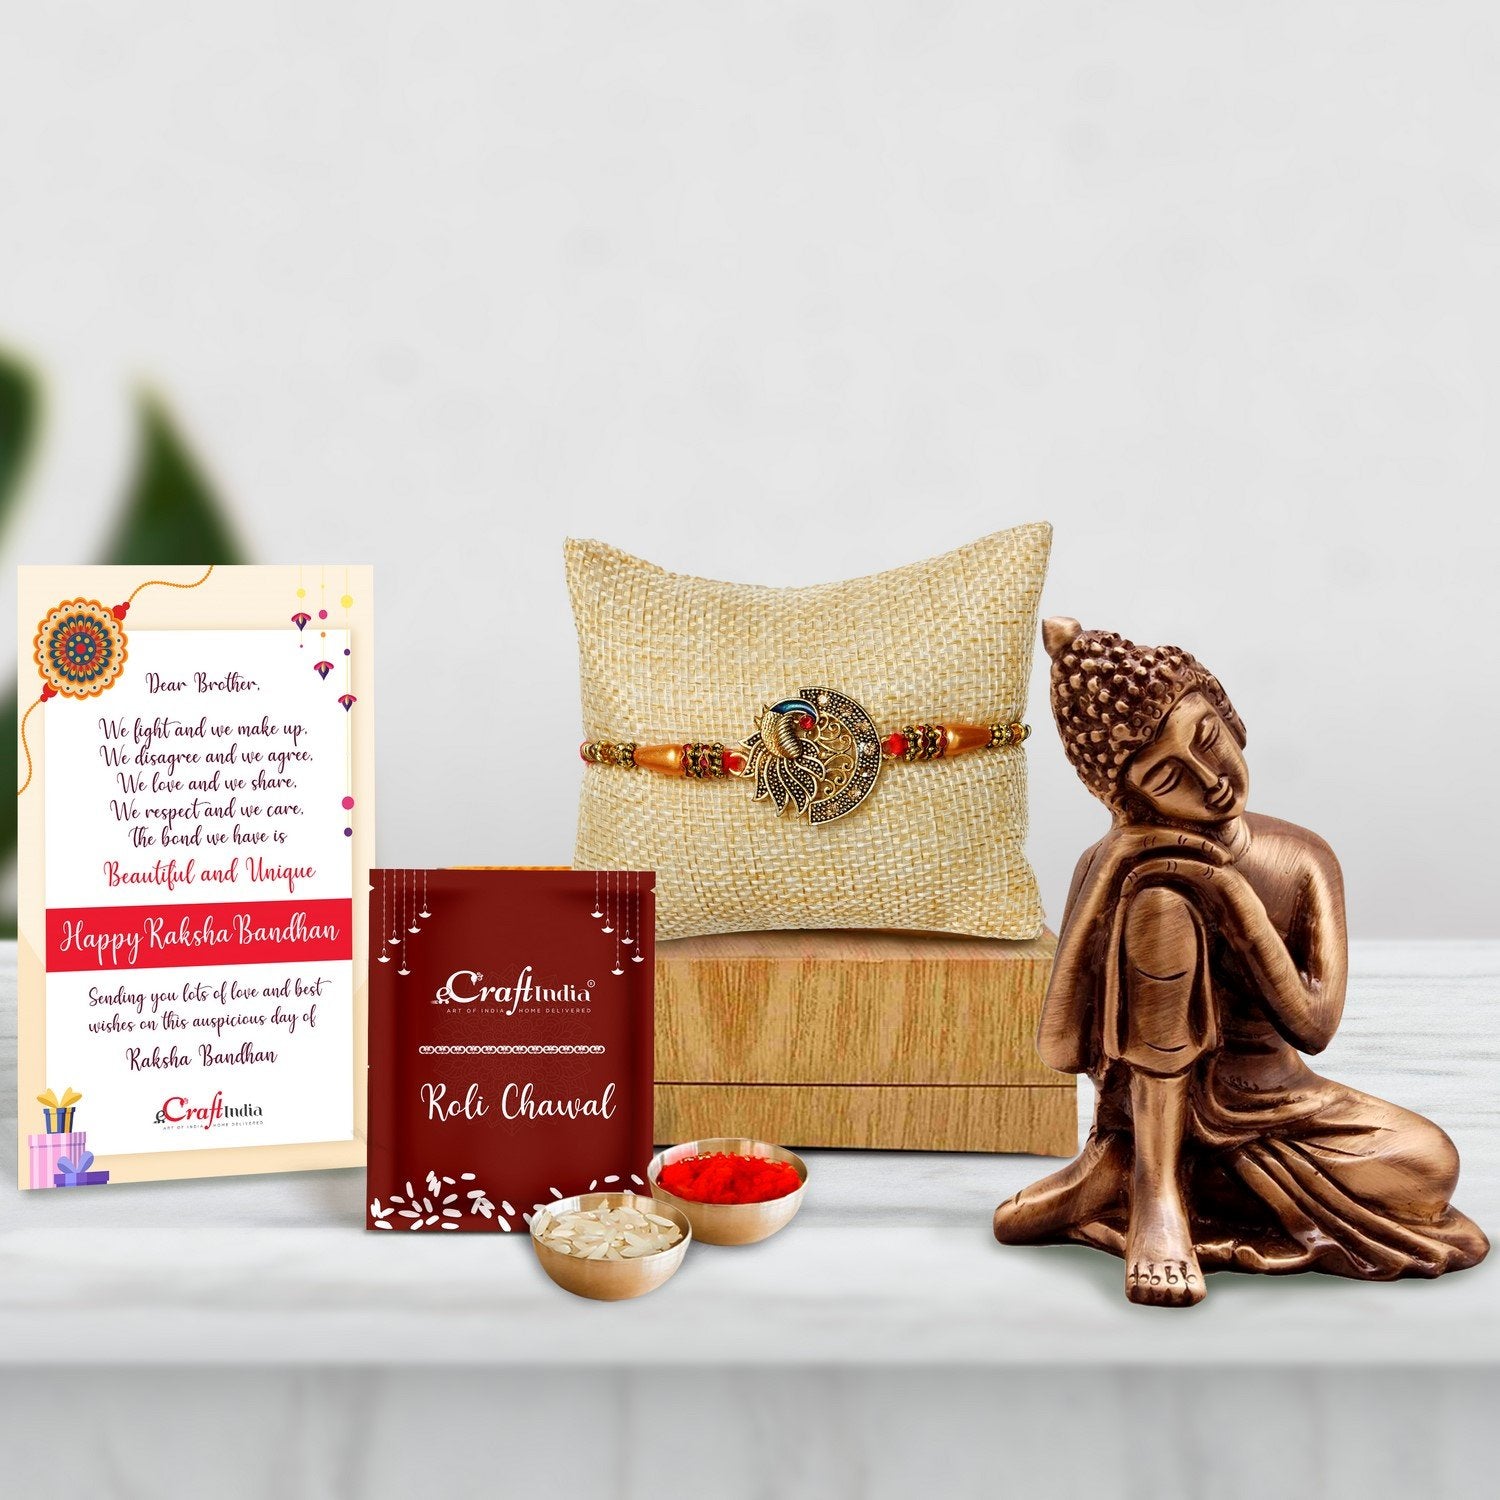 Designer Peacock Rakhi with Brass Buddha Resting Antique Artifact and Roli Chawal Pack, Best Wishes Greeting Card